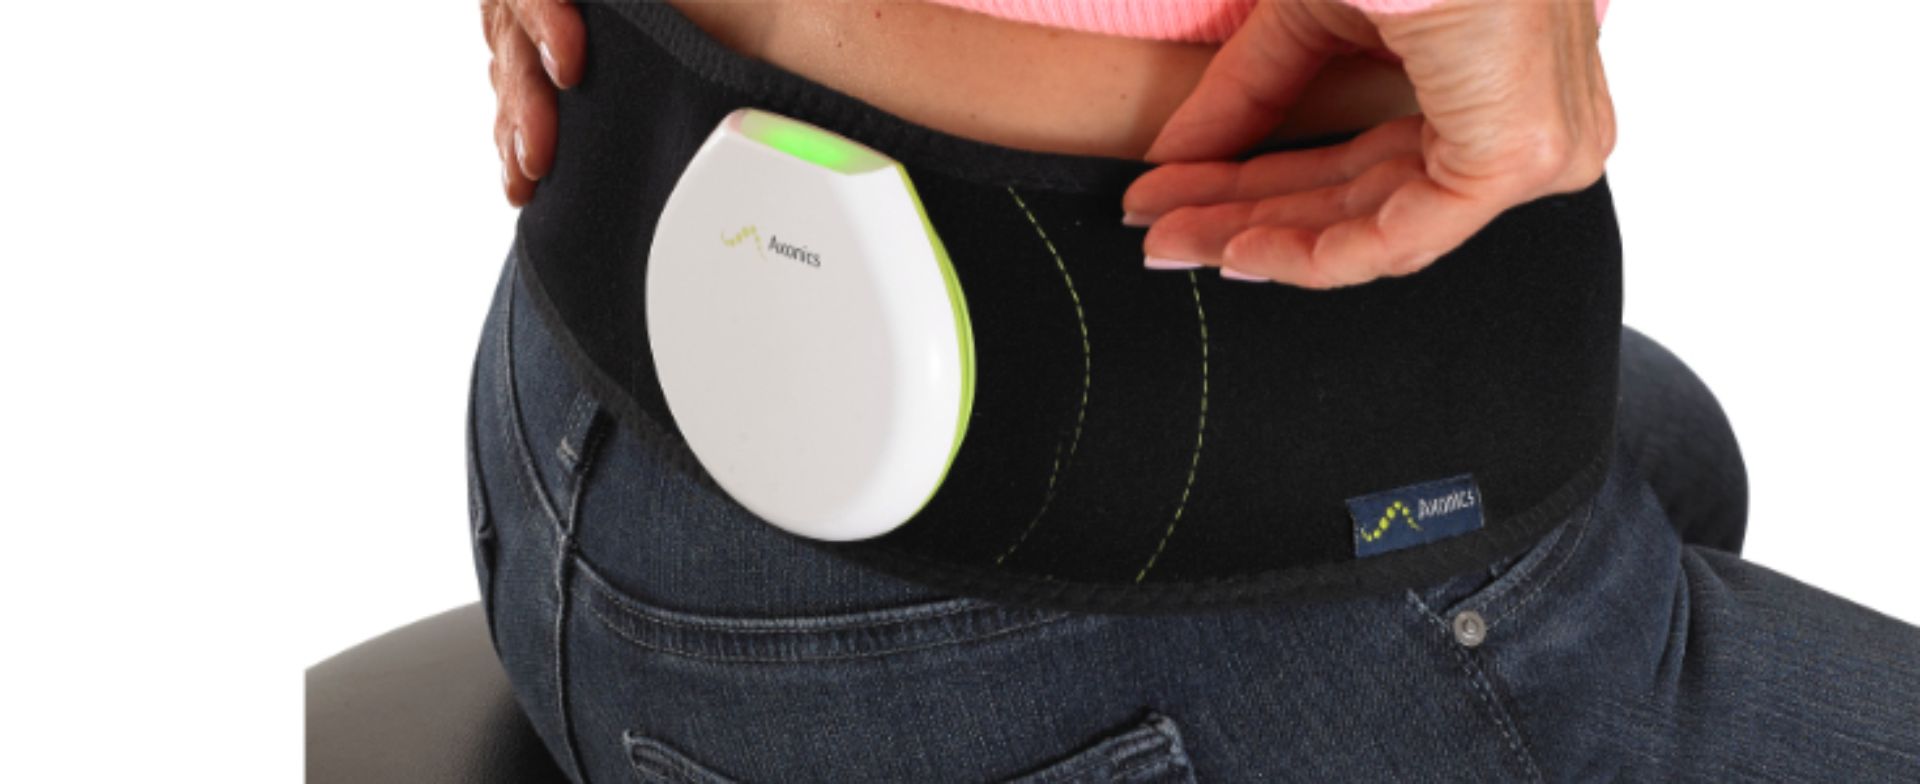 Axonics® System charging on a person's belt